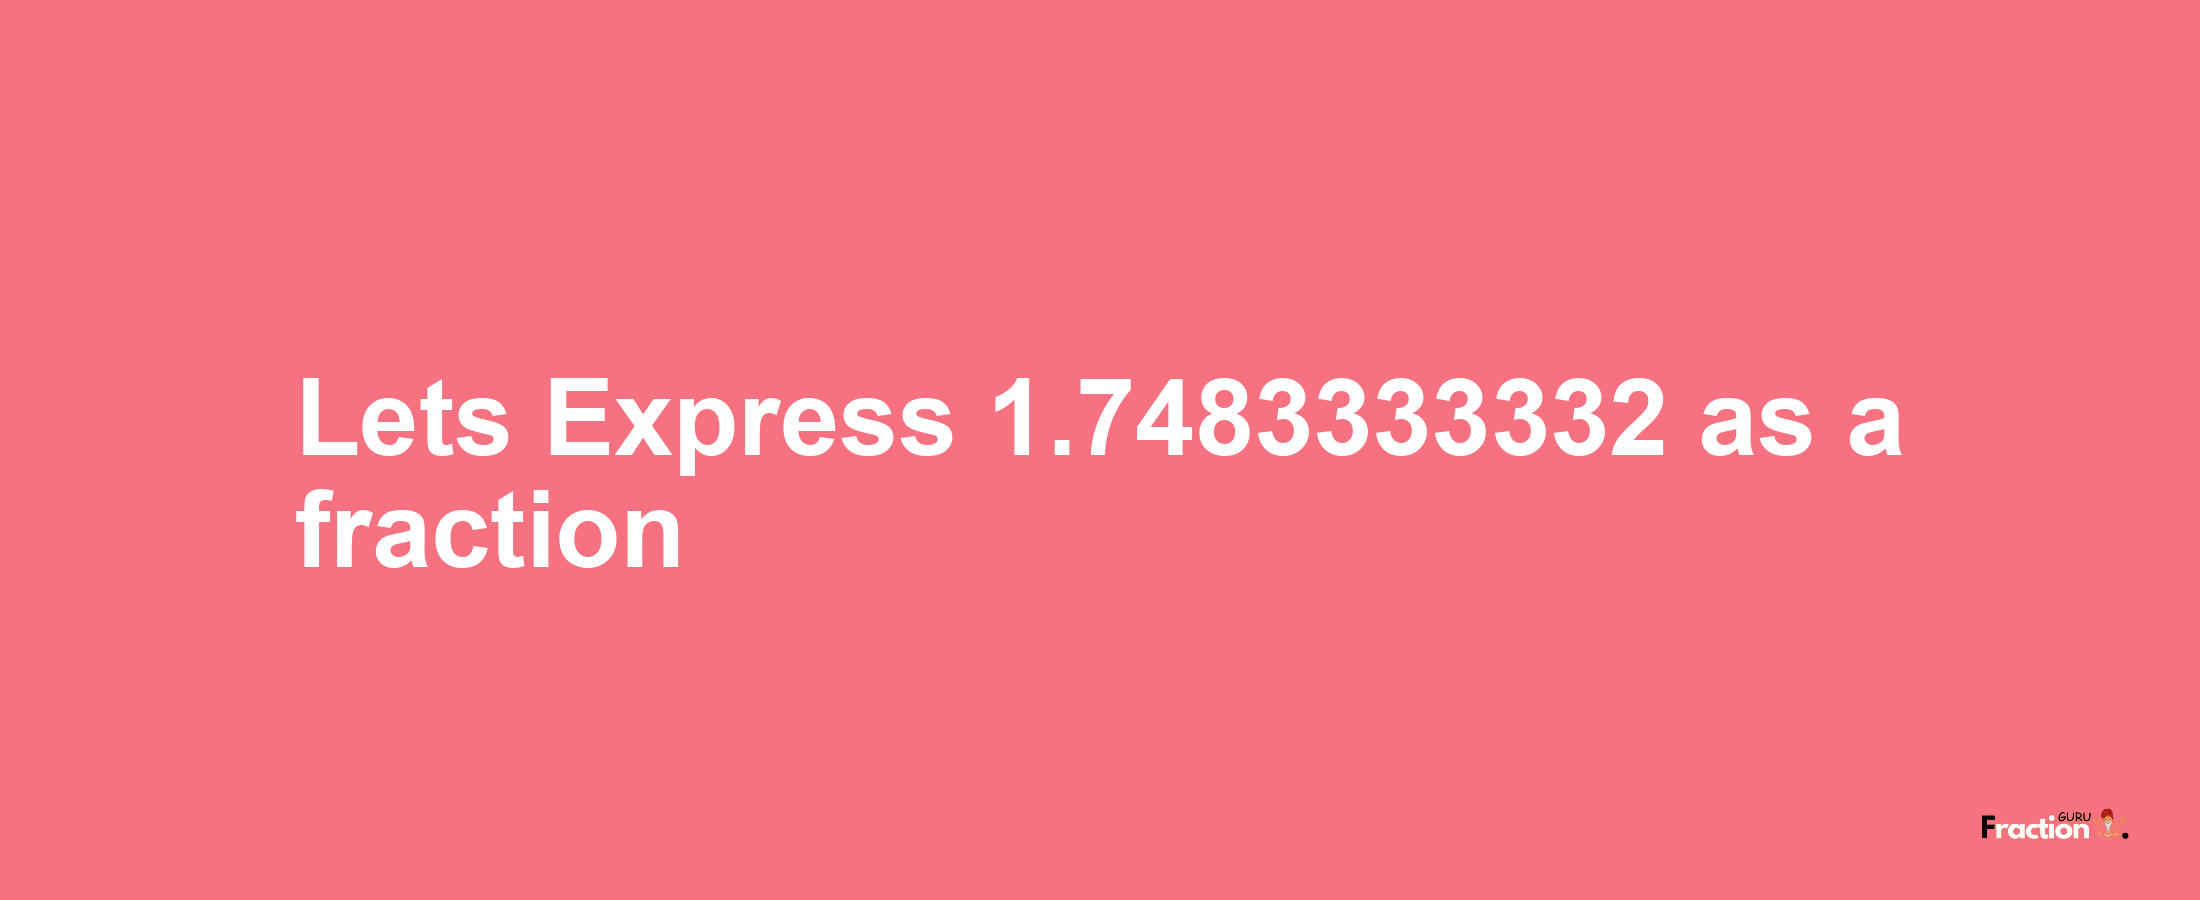 Lets Express 1.7483333332 as afraction